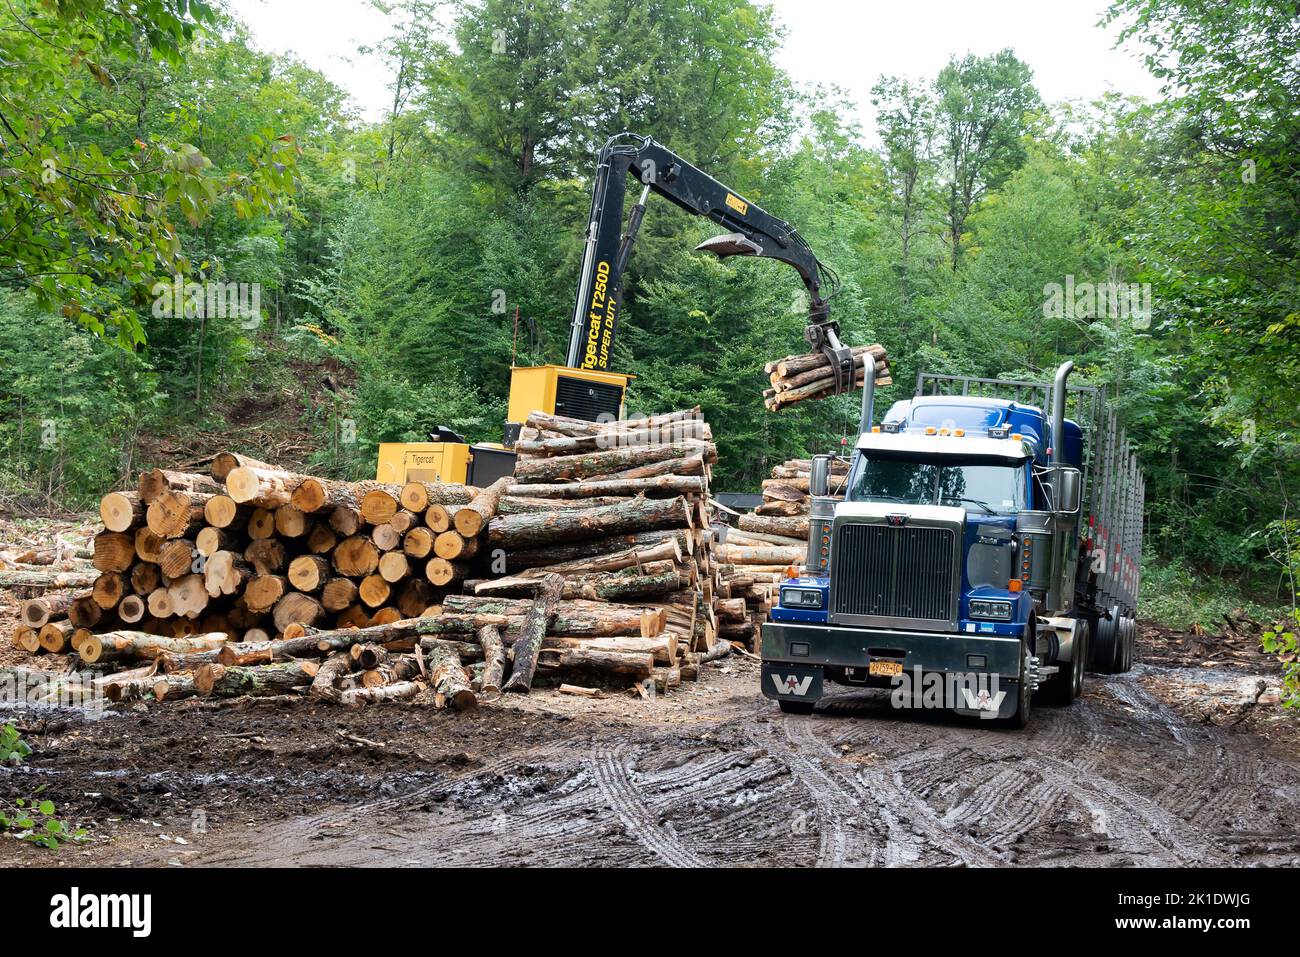 A logging job site with a loader loading logs onto a tractor trailer Stock Photo